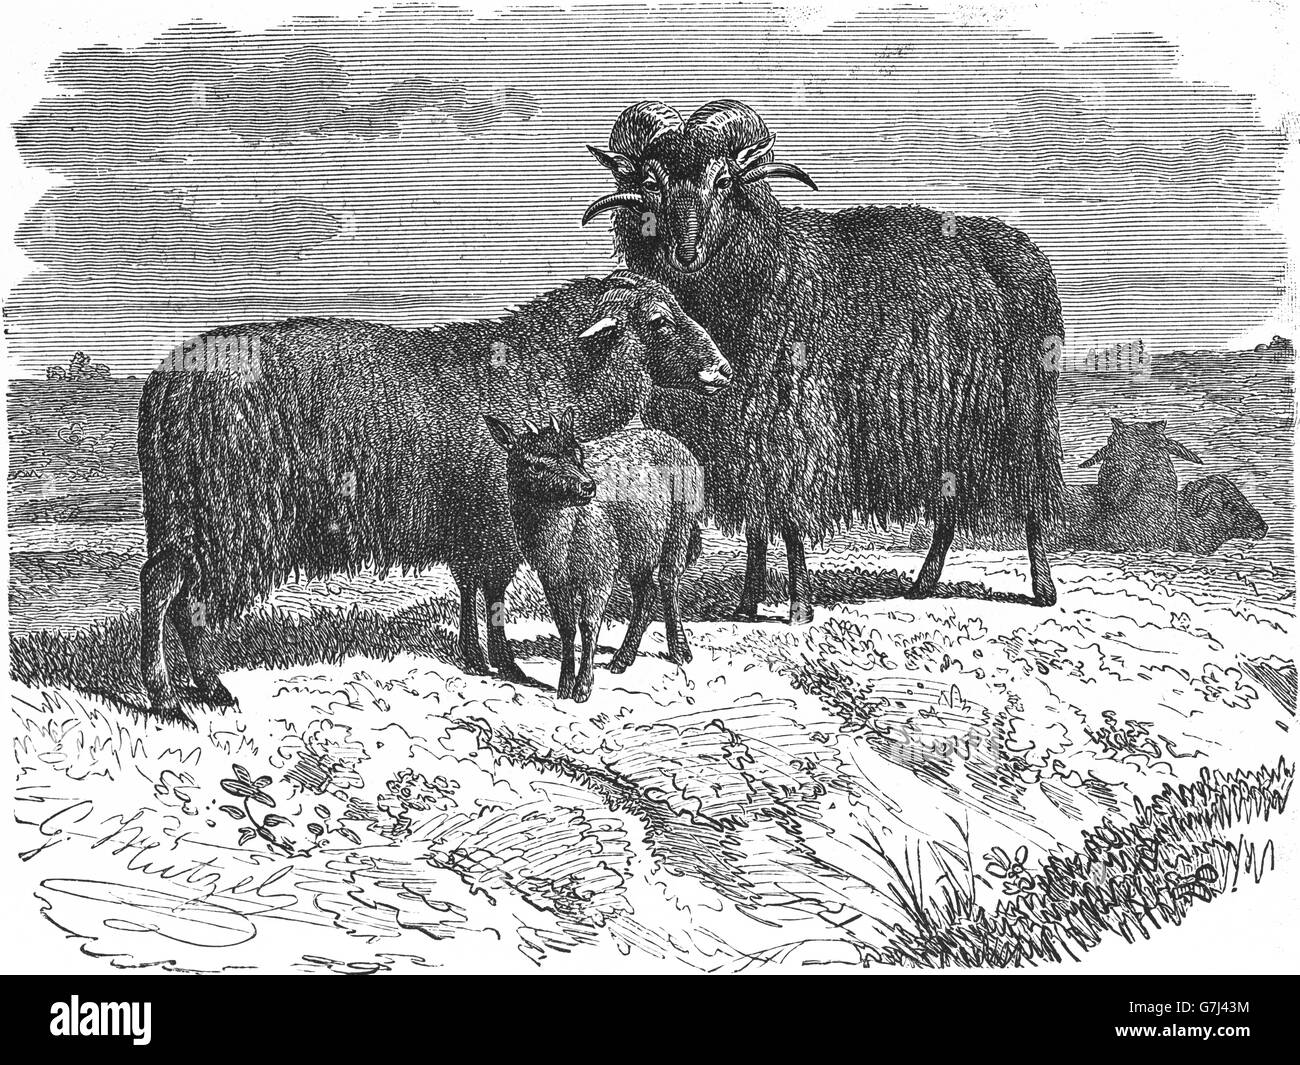 Sheep, Ovis aries, illustration from book dated 1904 Stock Photo